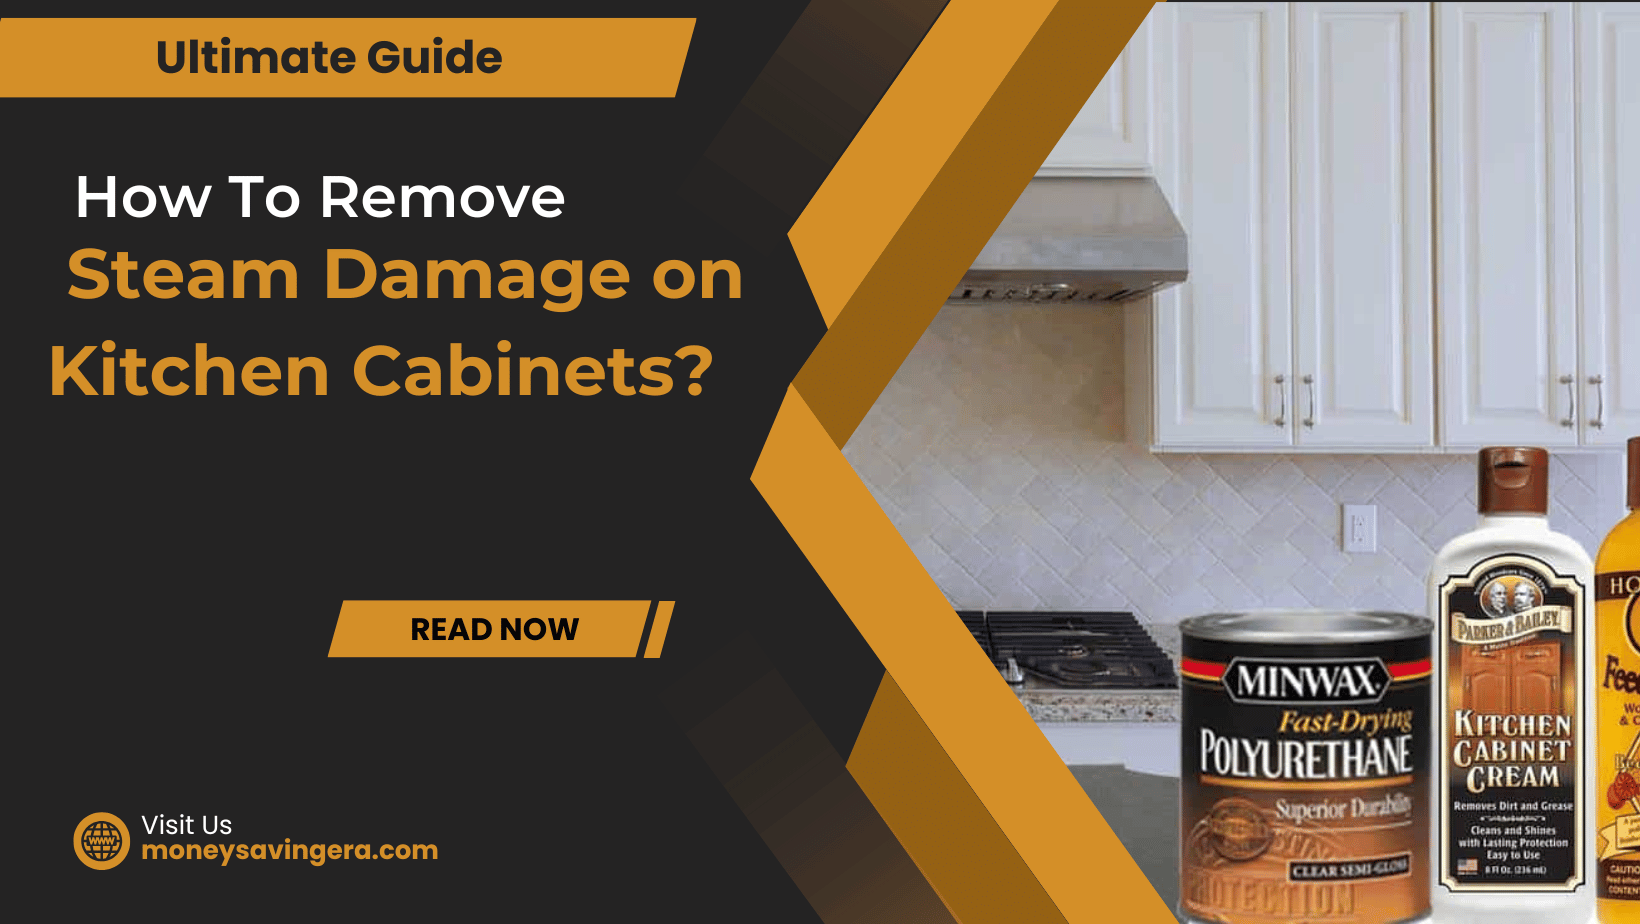 How To Remove Steam Damage on Kitchen Cabinets?